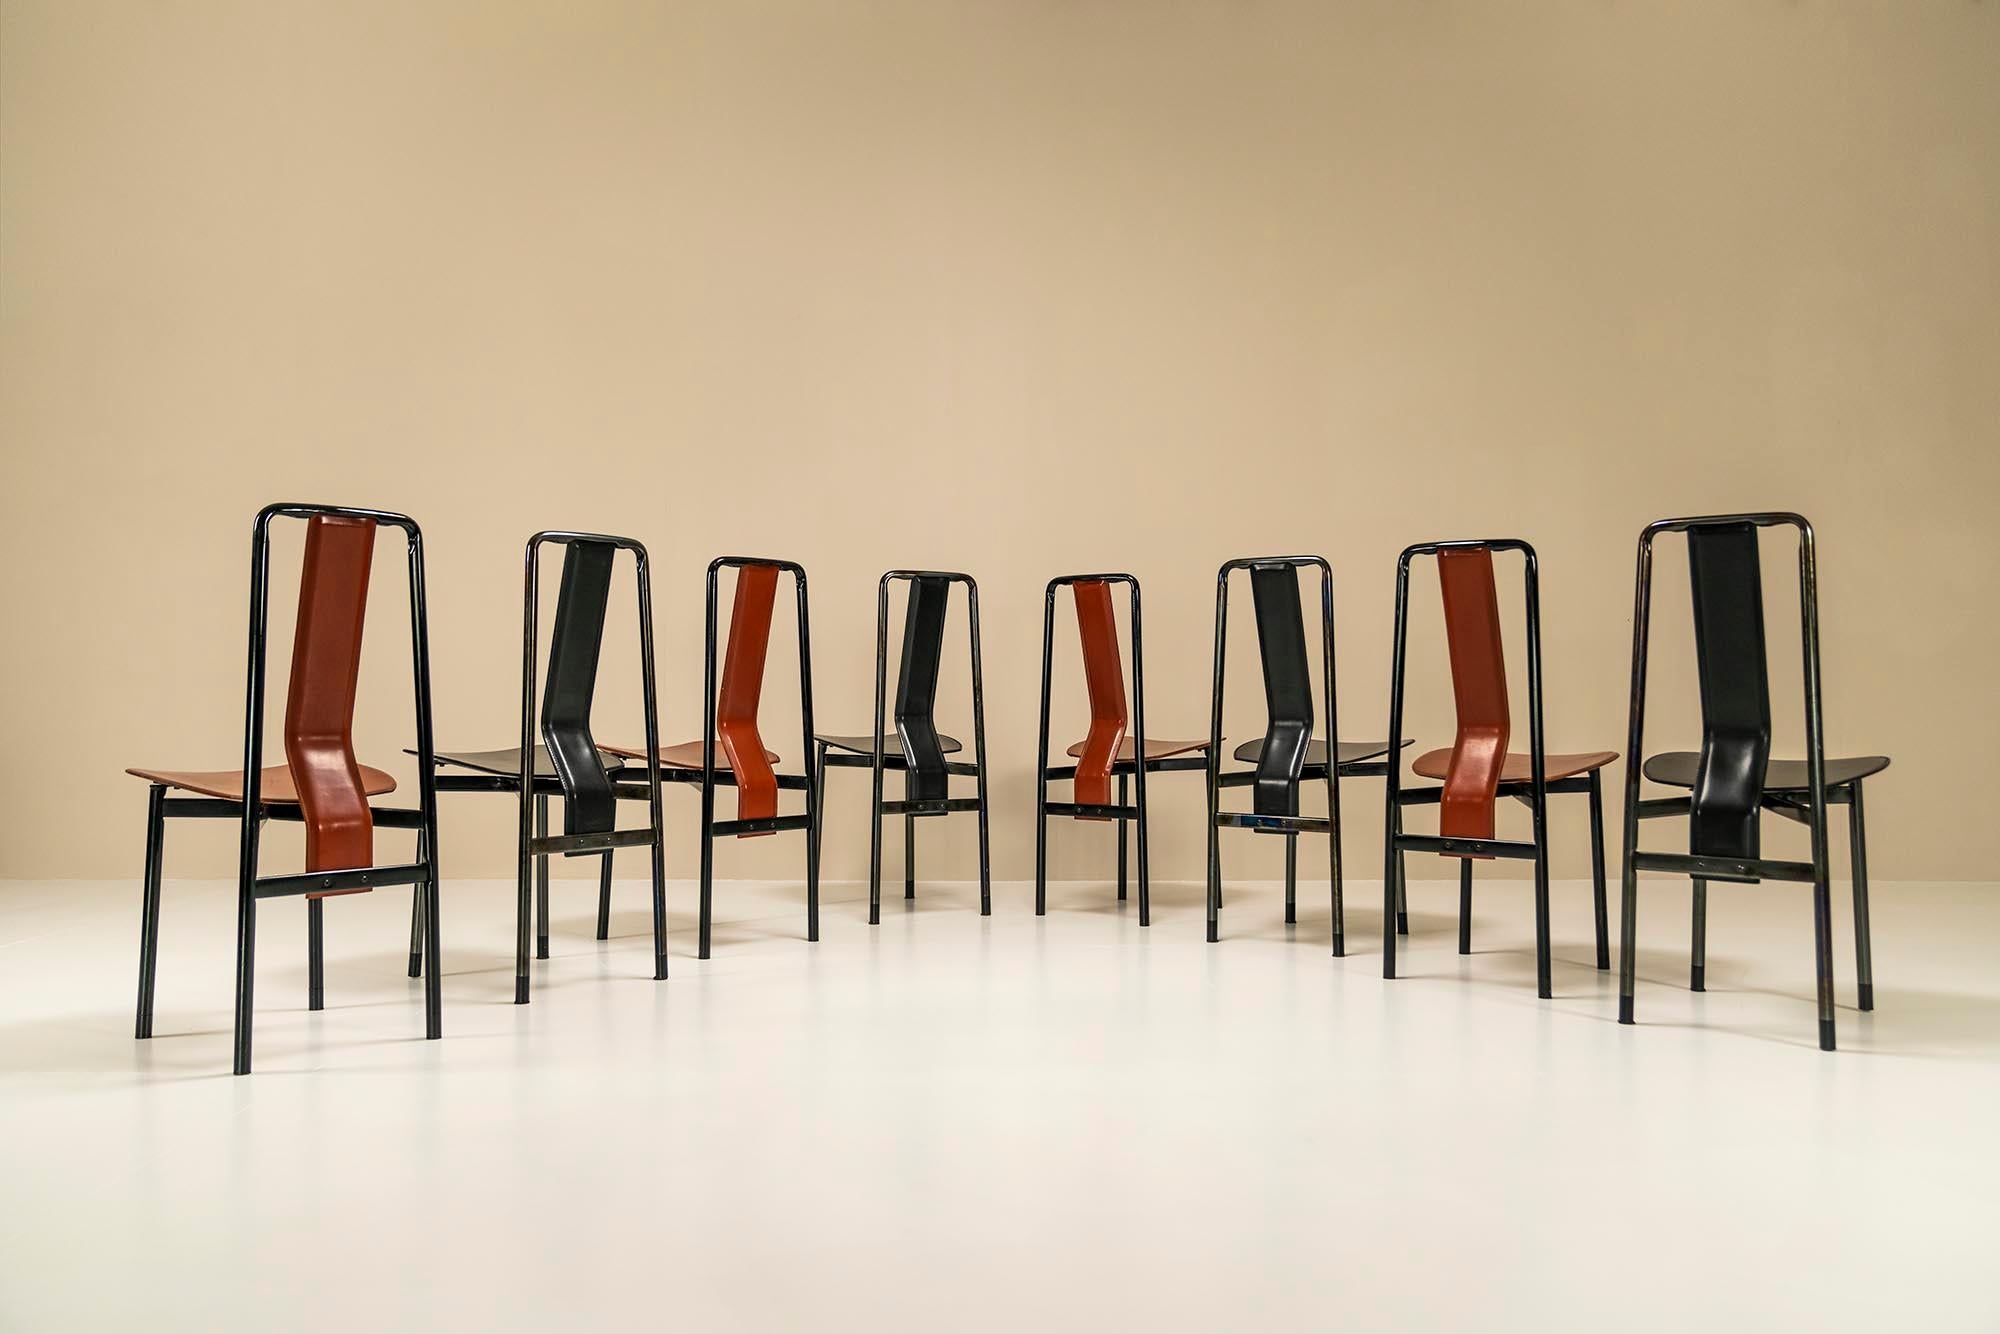 Italian Set of 8 “Irma” Dining Chairs by Achille Castiglioni for Zanotta, Italy 1970s For Sale